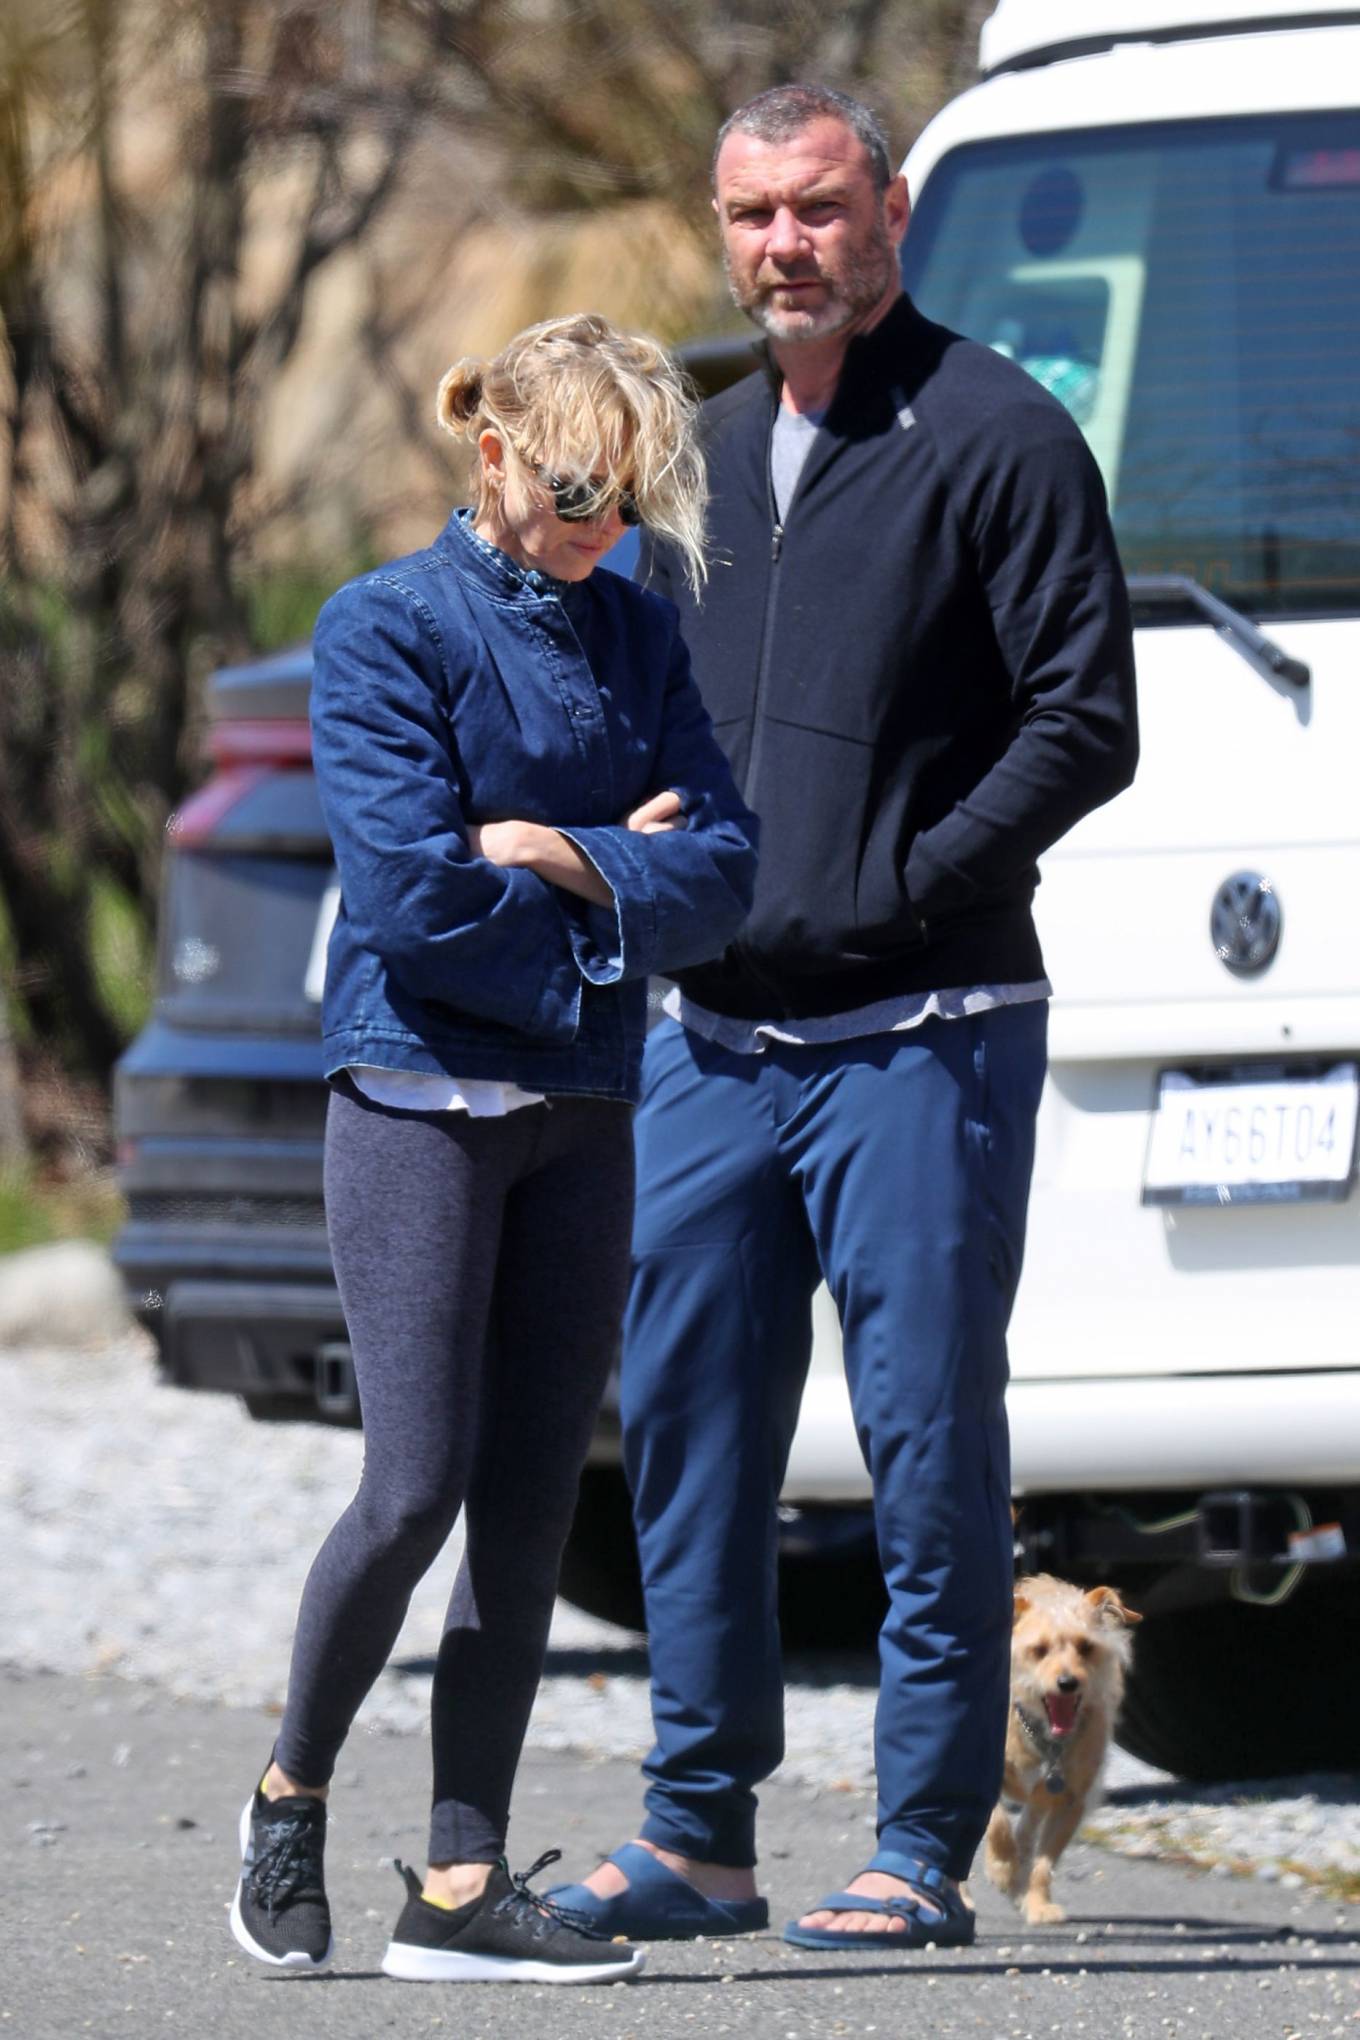 Naomi Watts 2020 : Naomi Watts – Spotted while stretching in The Hamptons-02